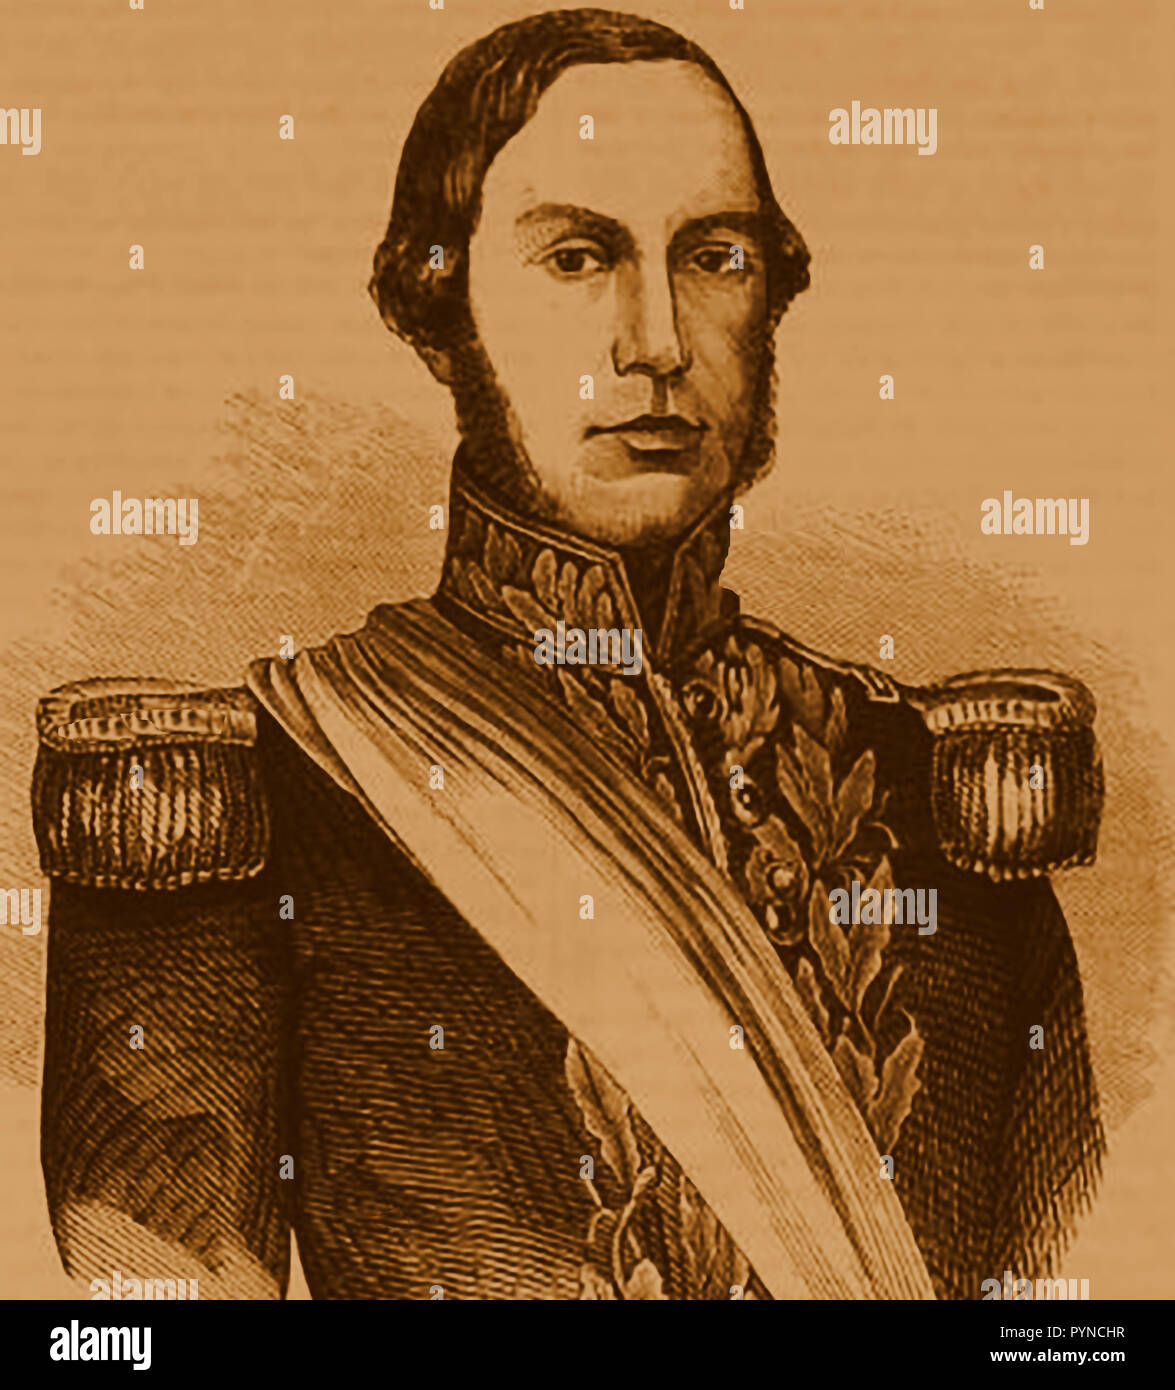 1859 portrait of  politician and Argentine President General Urquiza (Justo José de Urquiza y García) from a publication of the time Stock Photo